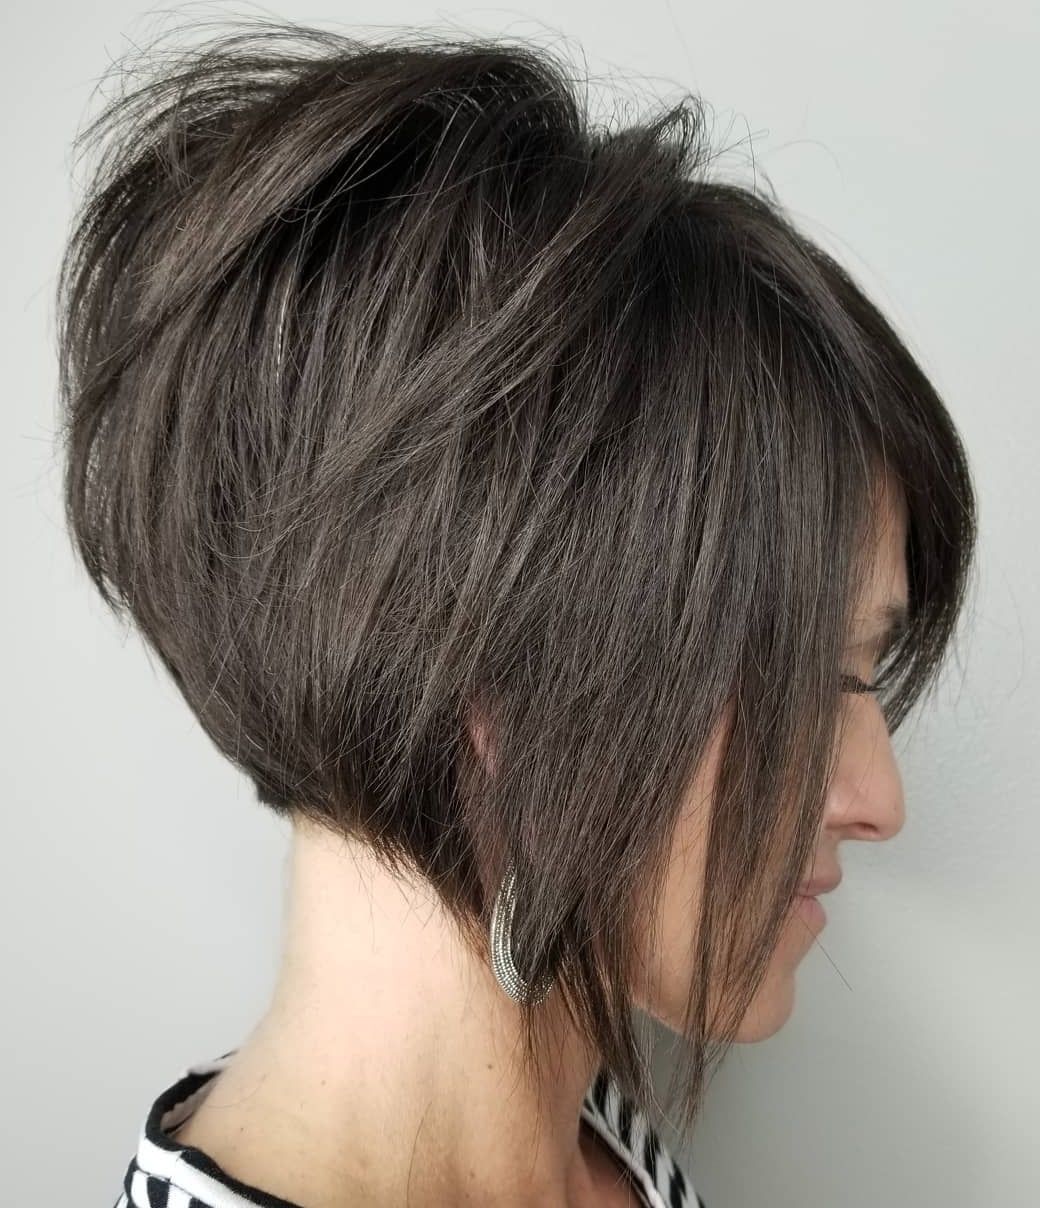 35 Captivating Short Hairstyles For Thick Hair You'll Want To Don In 2022 Throughout Deep Asymmetrical Short Hairstyles For Thick Hair (View 12 of 25)